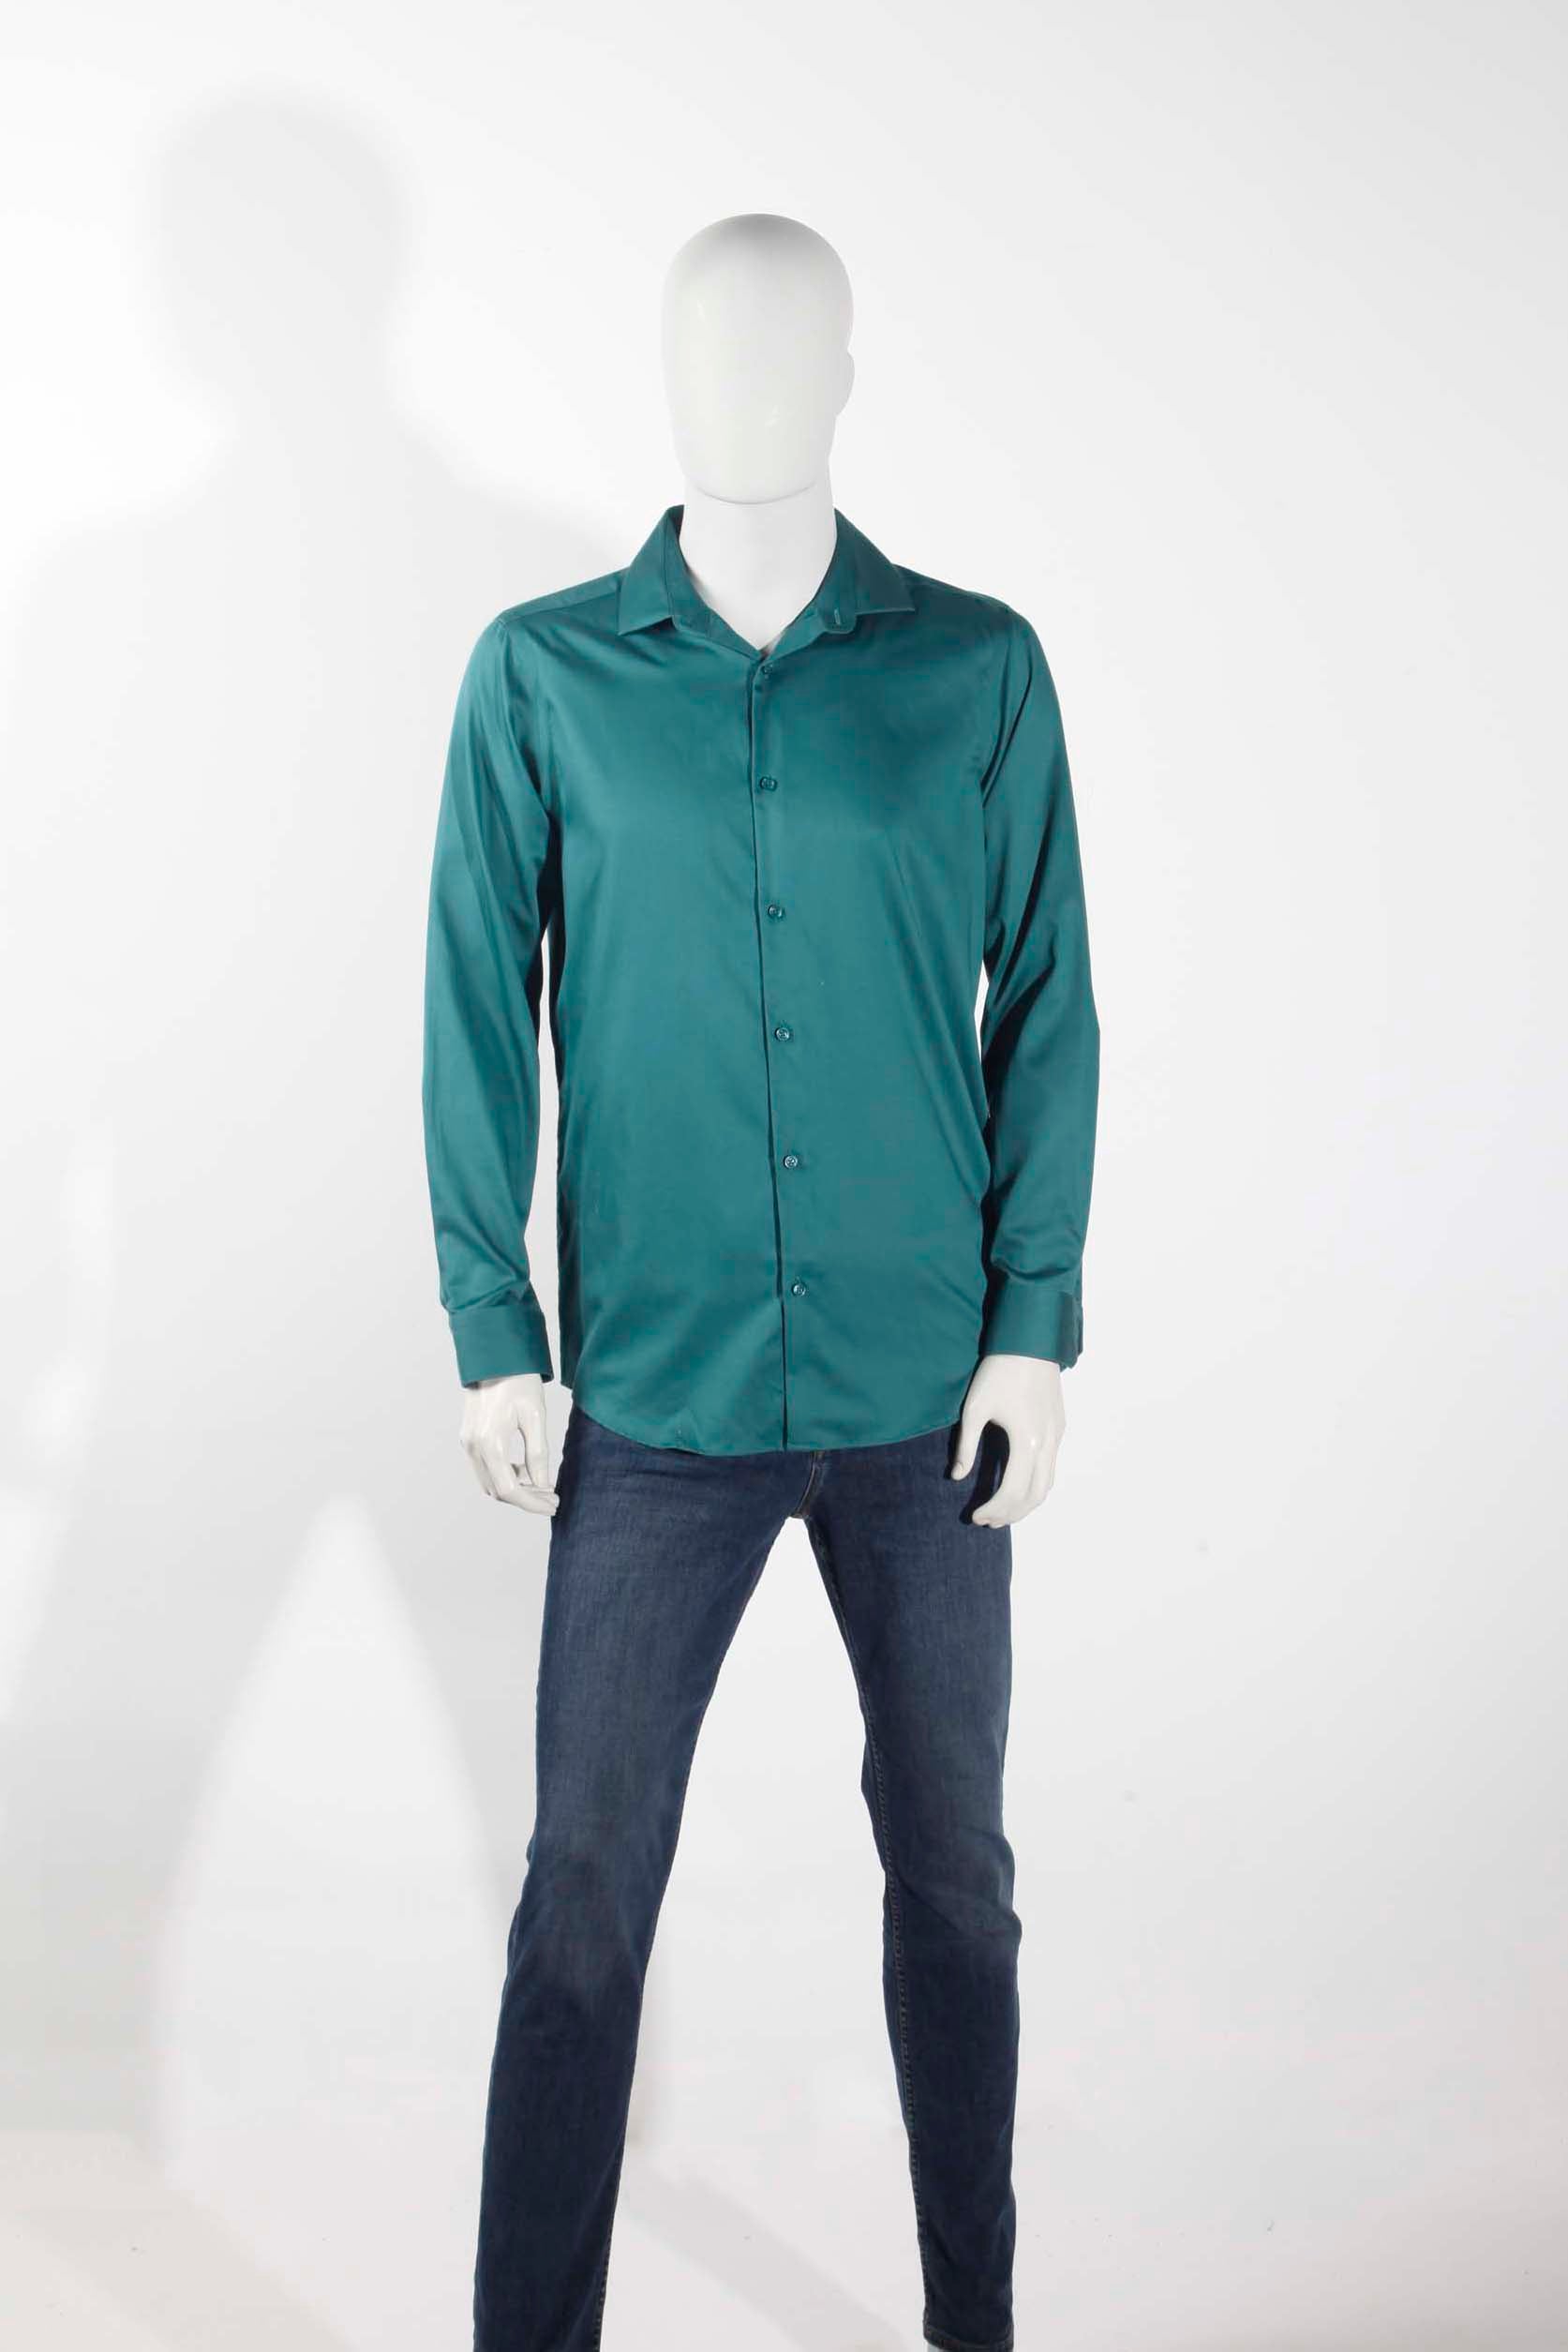 Men's Turquoise-Green Stretch Shirt (Large)